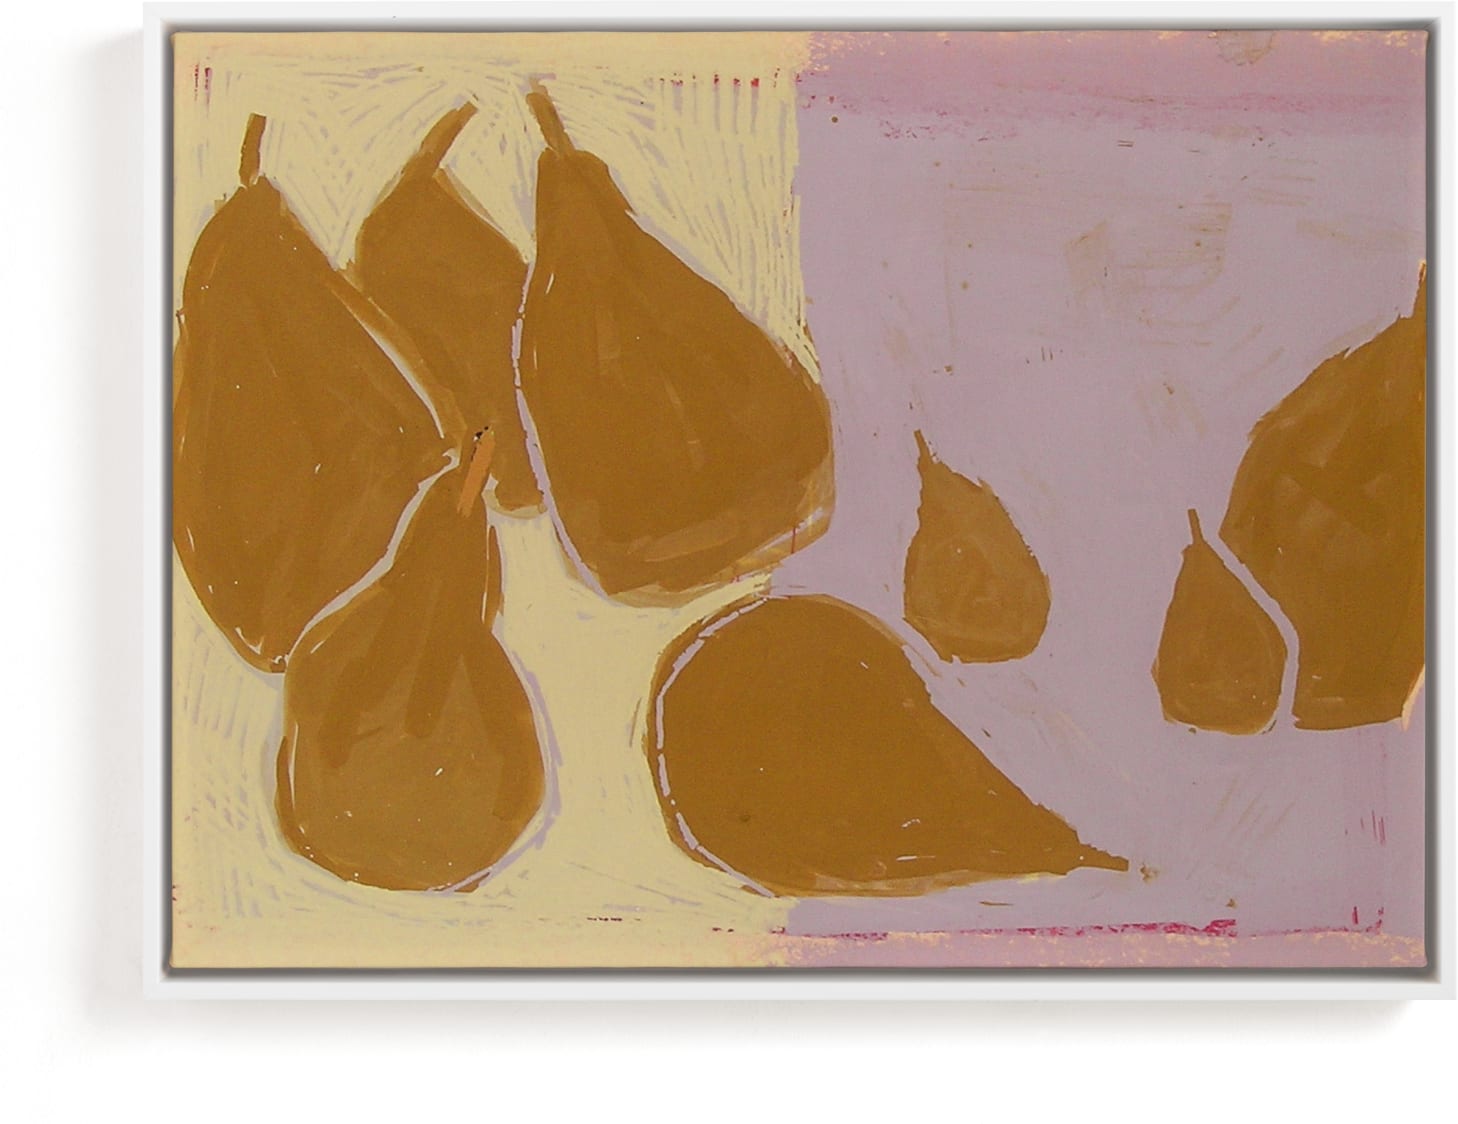 This is a yellow, beige, rosegold art by Liz Innvar called Bosc pears.